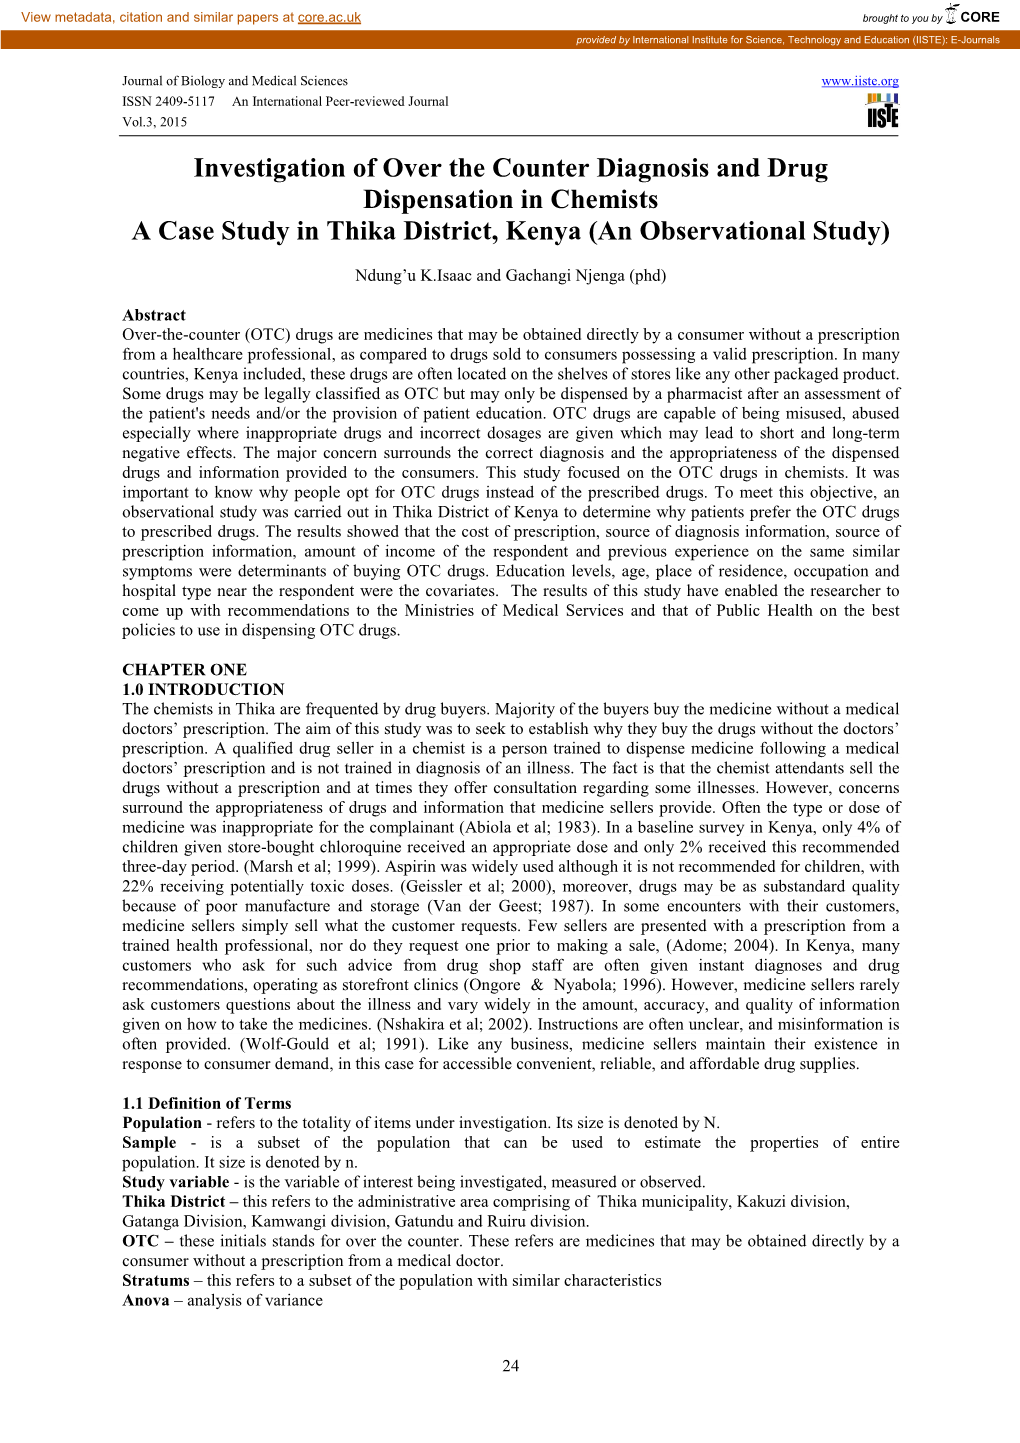 Investigation of Over the Counter Diagnosis and Drug Dispensation in Chemists a Case Study in Thika District, Kenya (An Observational Study)